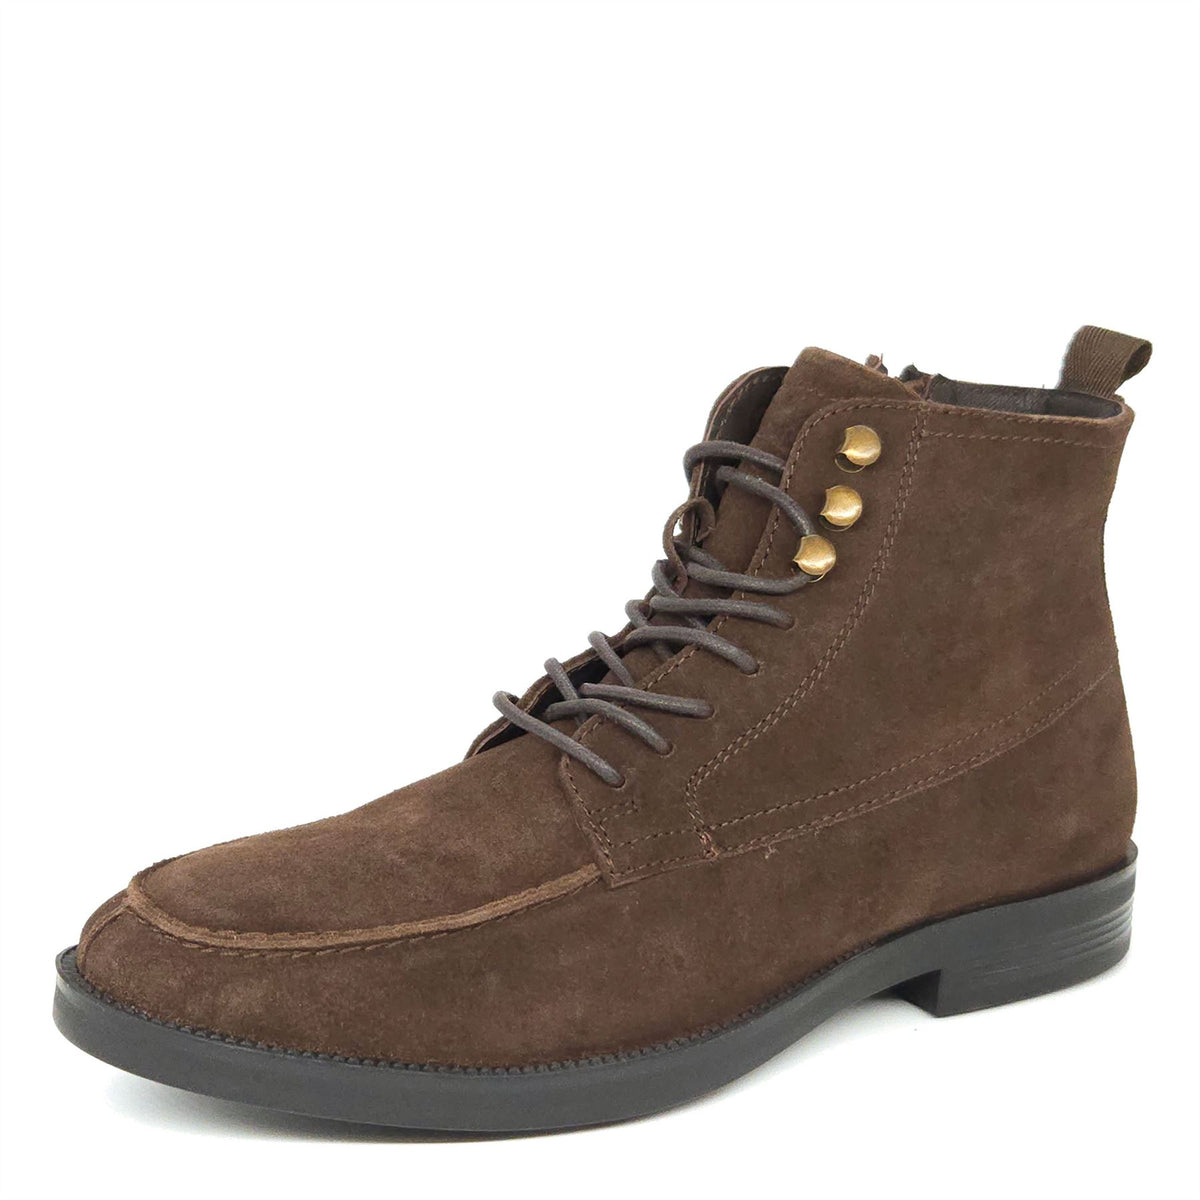 HX London Ealing Suede Lace Up Boots